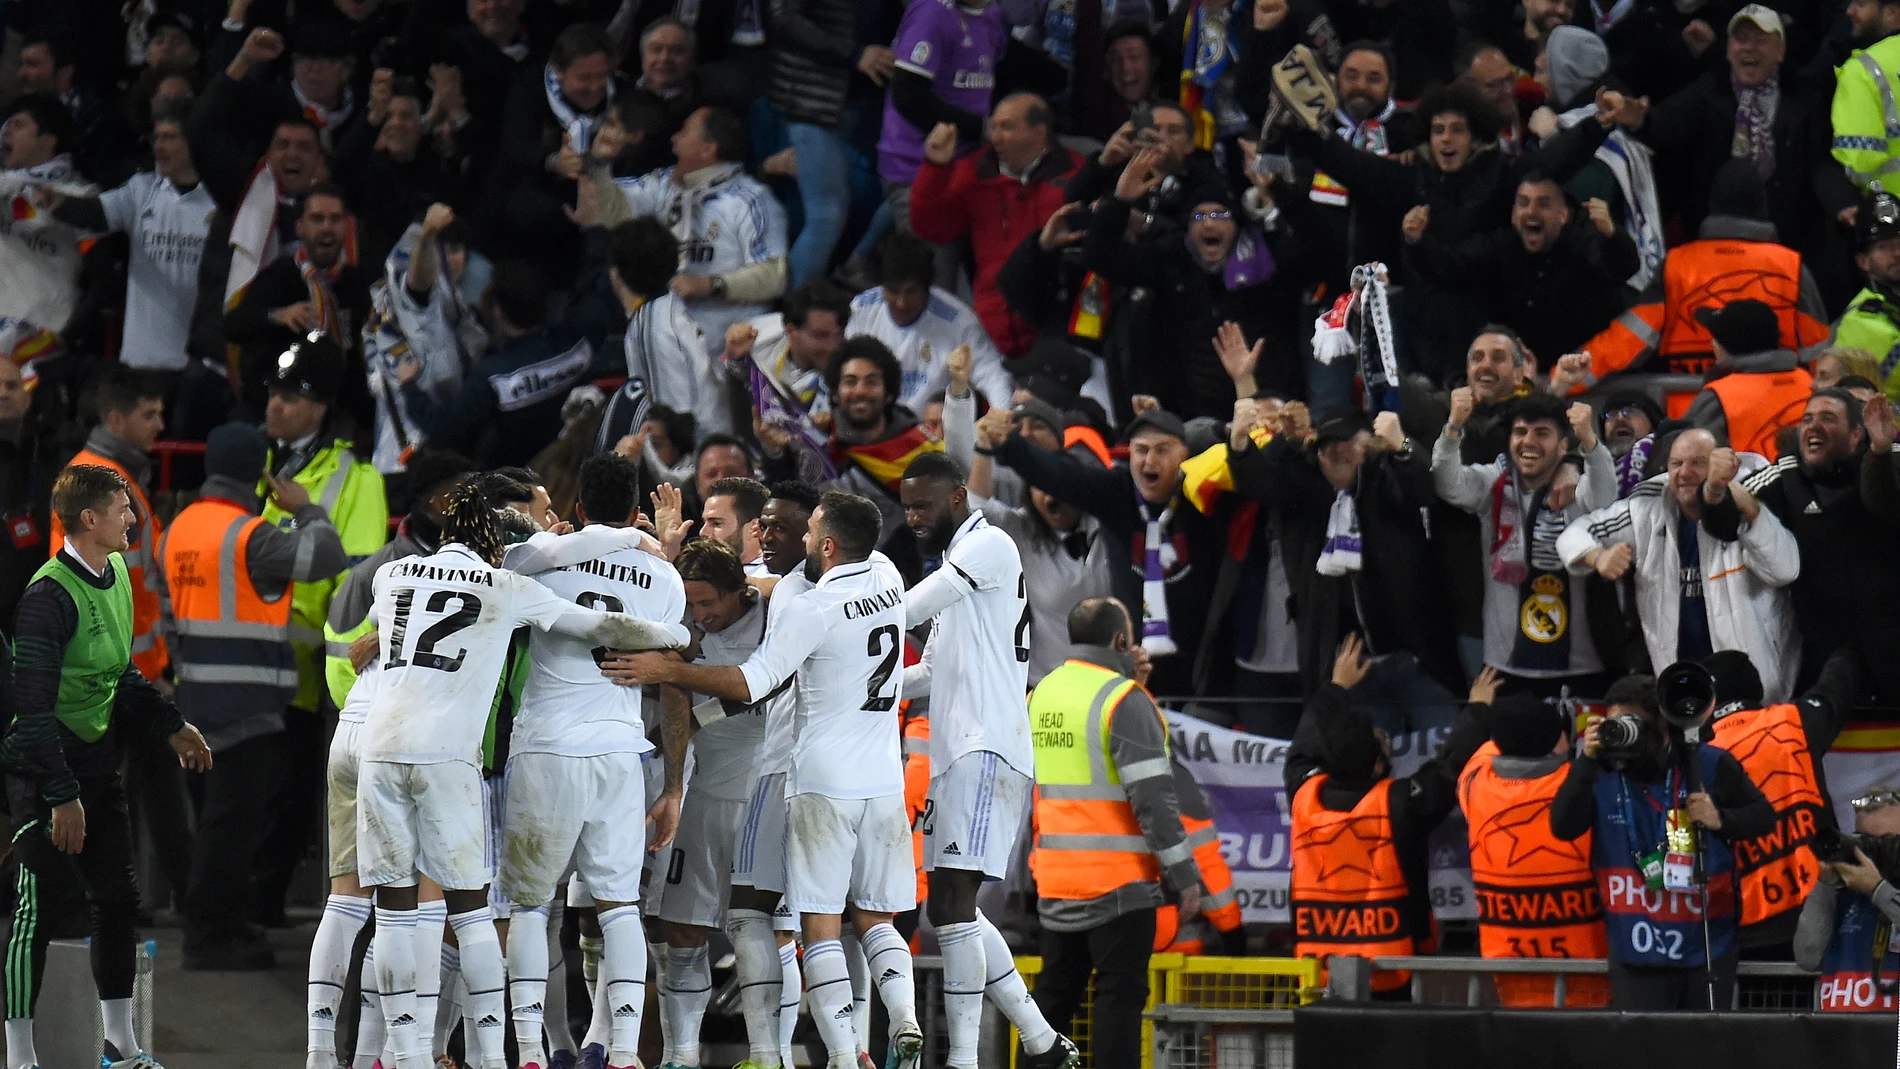 Liverpool (United Kingdom), 21/02/2023.- Players of Real Madrid celebrate after scoring their 5th goal during the UEFA Champions League, Round of 16, 1st leg match between Liverpool FC and Real Madrid in Liverpool, Britain, 21 February 2023. (Liga de Campeones, Reino Unido) EFE/EPA/Peter Powell 